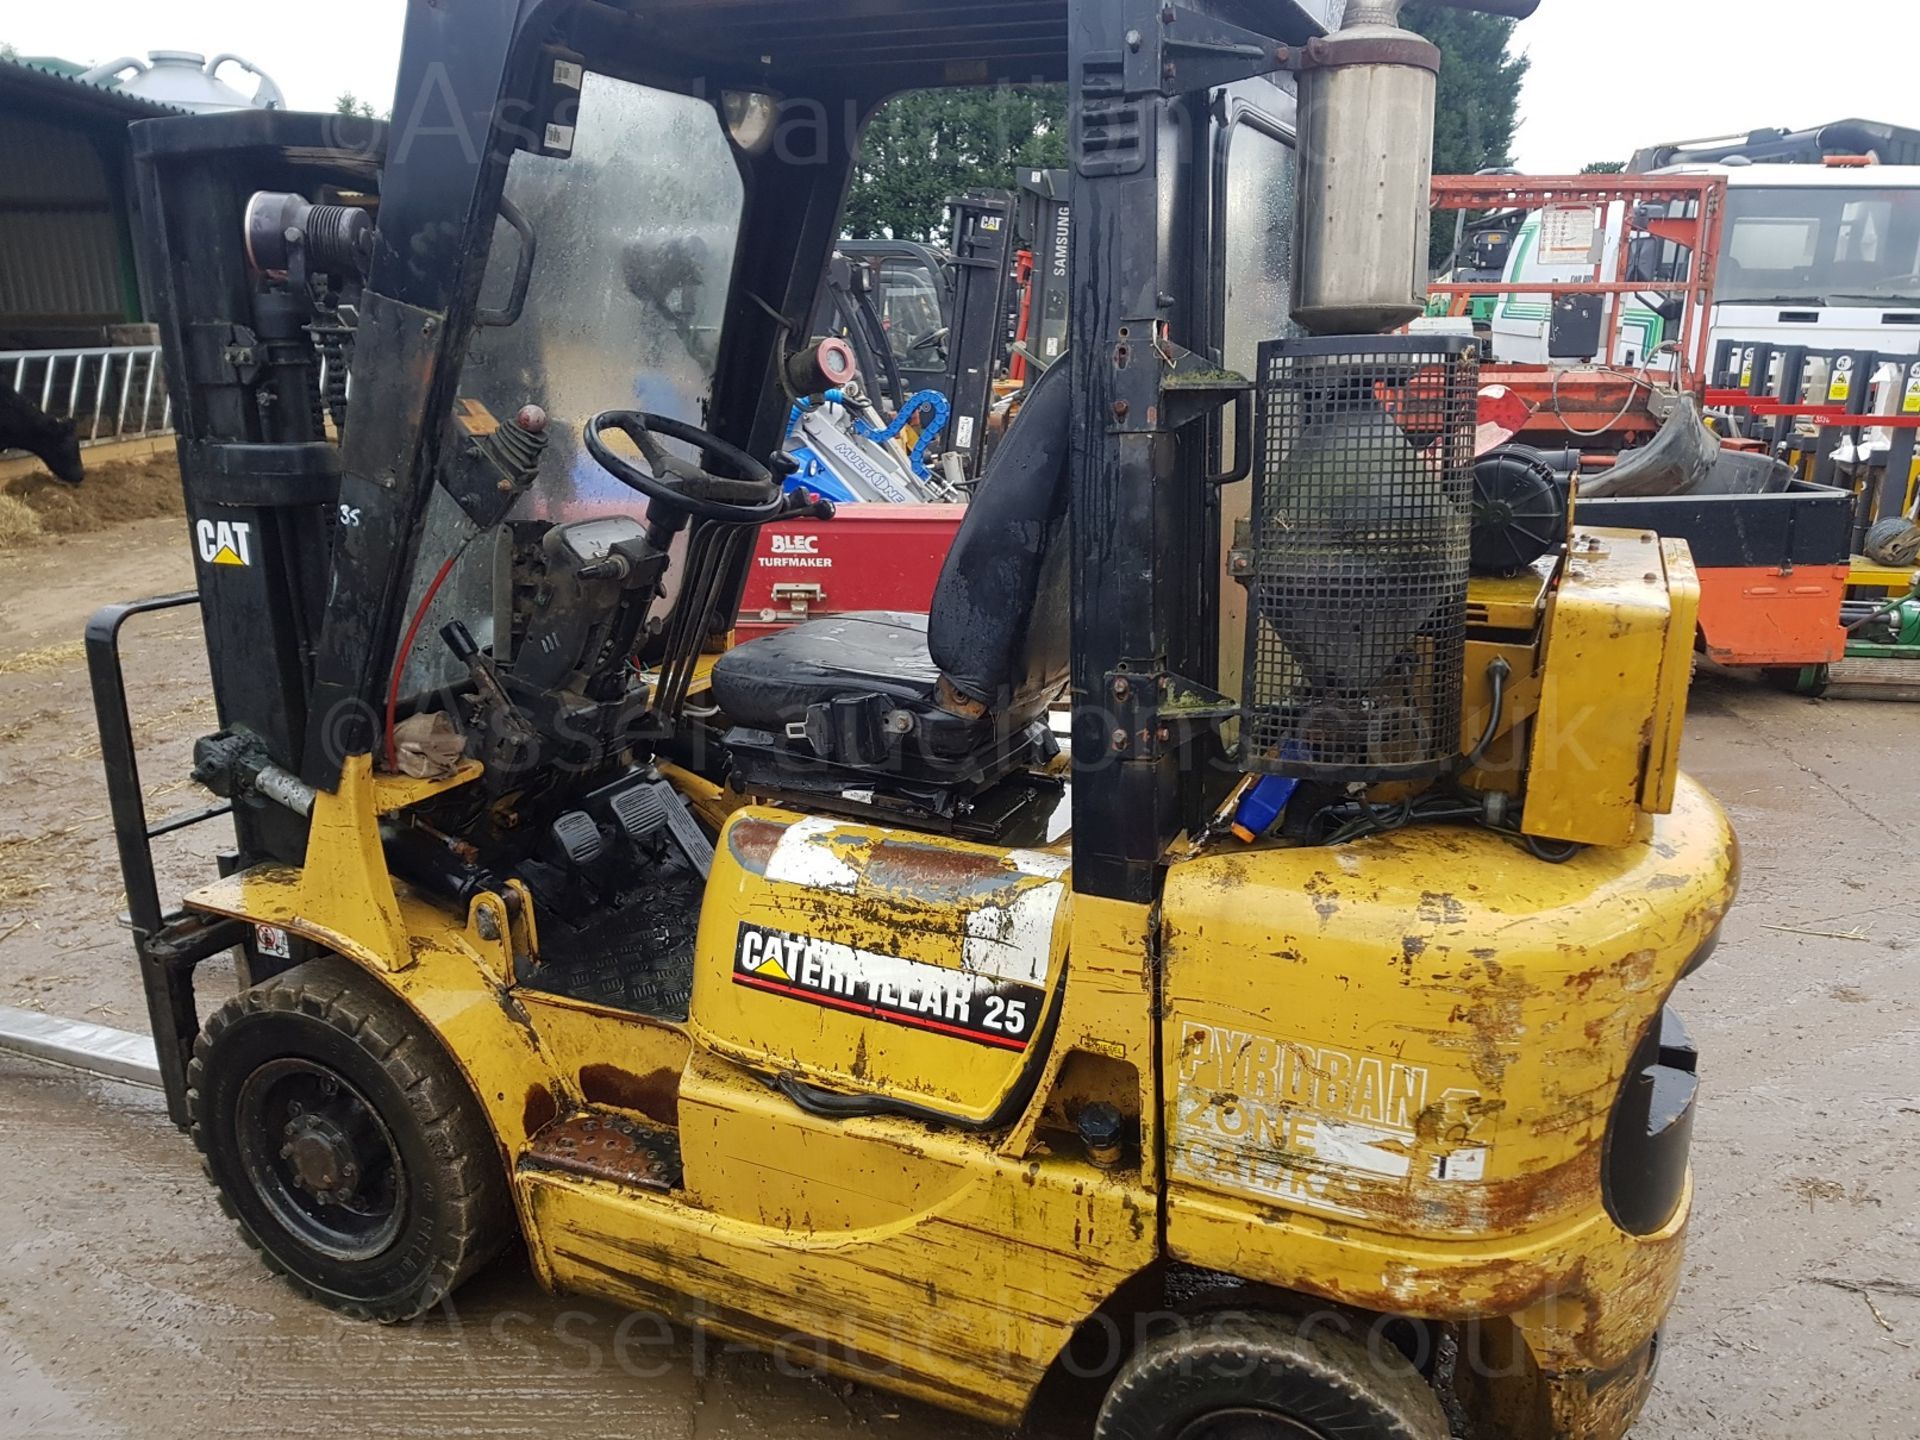 2001 CATERPILLAR 25 FORKLIFT CONTAINER SPEC WITH SIDE SHIFT, STARTS, RUNS AND LIFTS *PLUS VAT* - Image 4 of 7